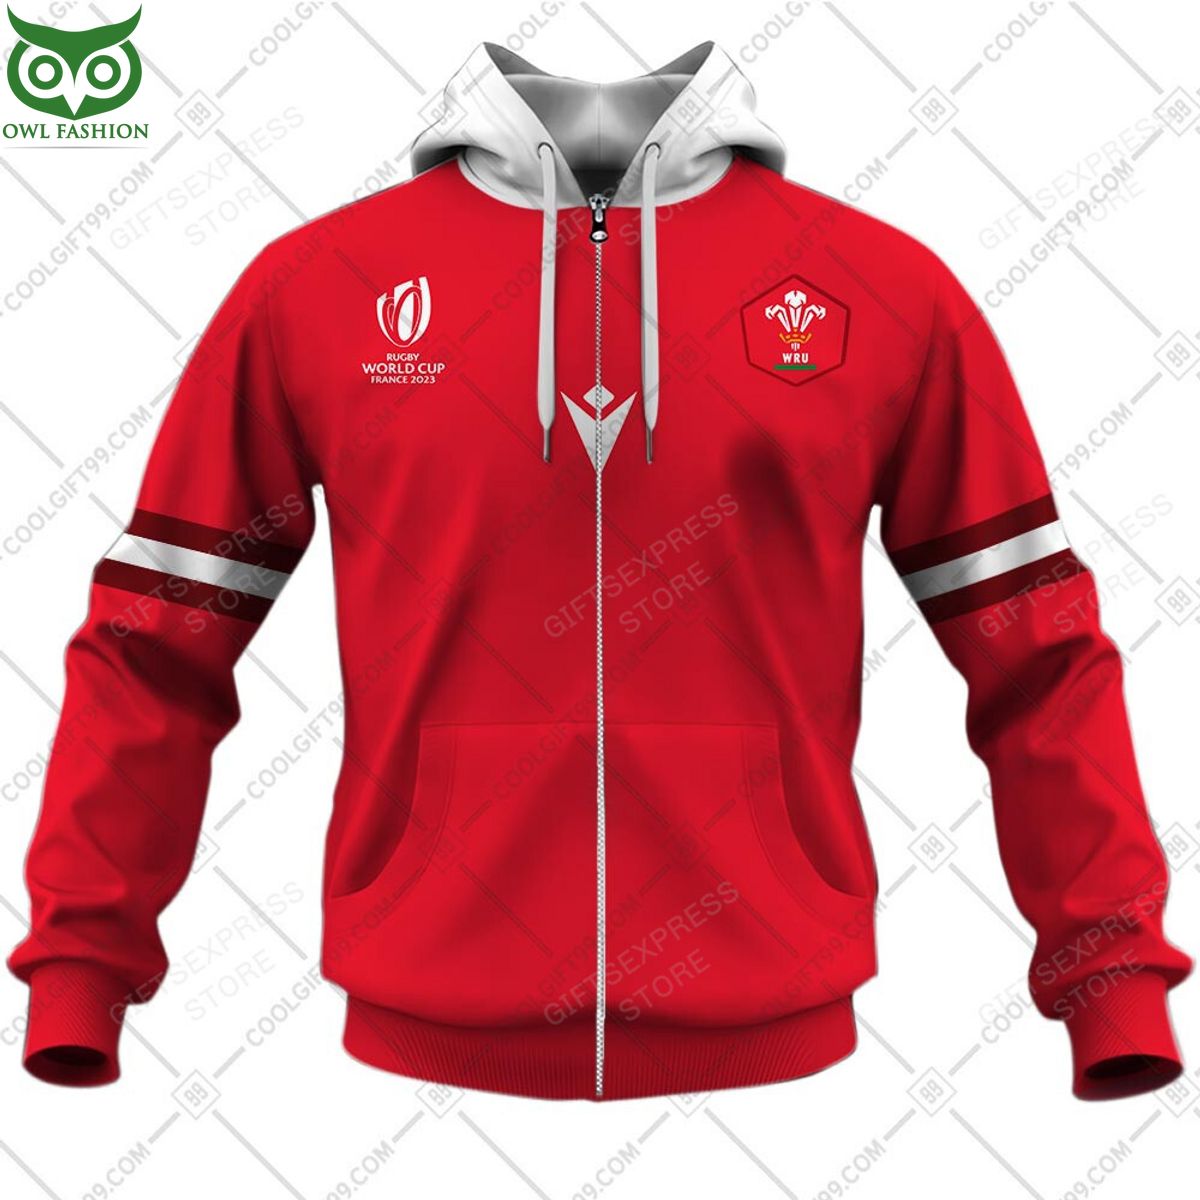 rugby world cup wales home jersey personalized 3d hoodie tshirt 8 Xzd6r.jpg